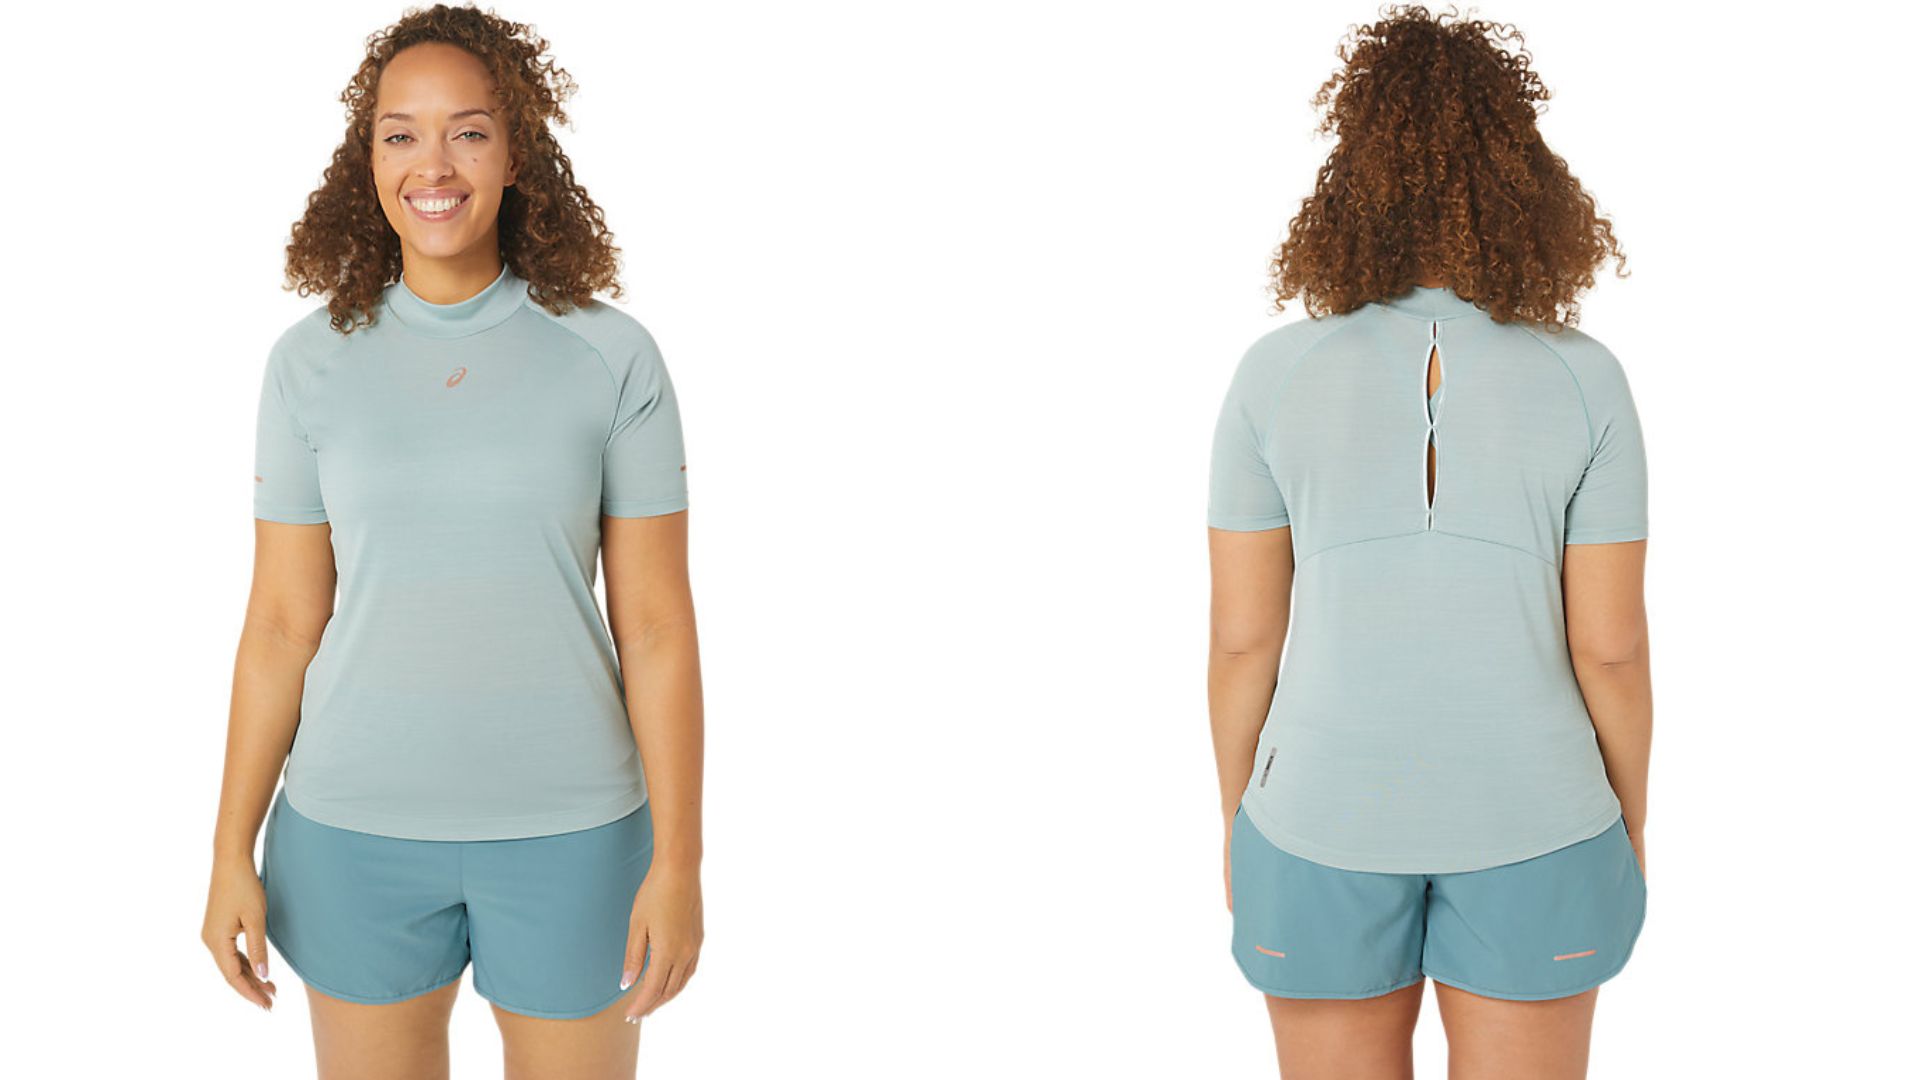 Asics Nagino Run Short Sleeve Top in Ocean Haze, worn by model, front and back views